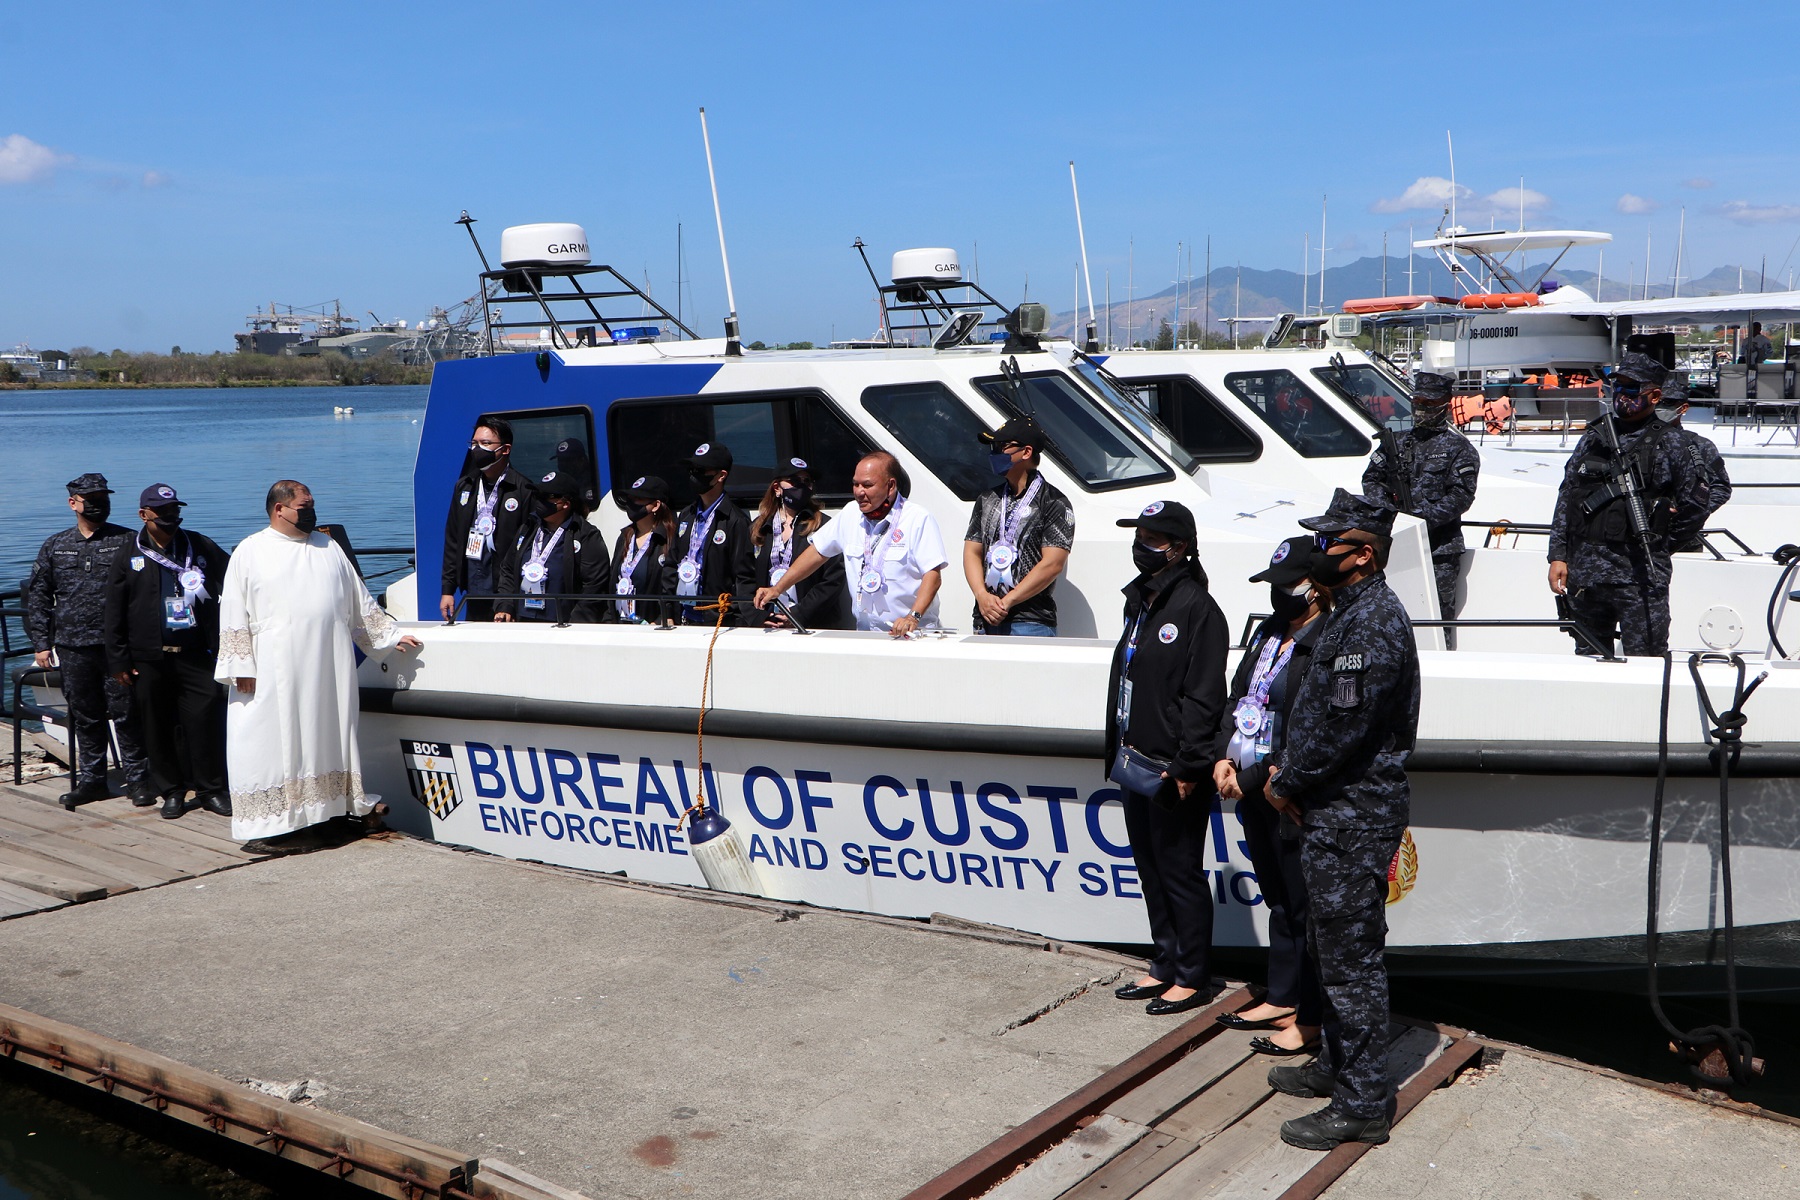 SBMA Chairman and Administrator Rolen C. Paulino along with District Collector Maritess T. Martin of the Bureau of Customs (BOC) Port of Subic and Rev. Fr. Raymann G. Catindig join other BOC officials and personnel for a souvenir picture during the inauguration and launching of two fast patrol boats at the Watercraft Ventures pier Wednesday, May 4.